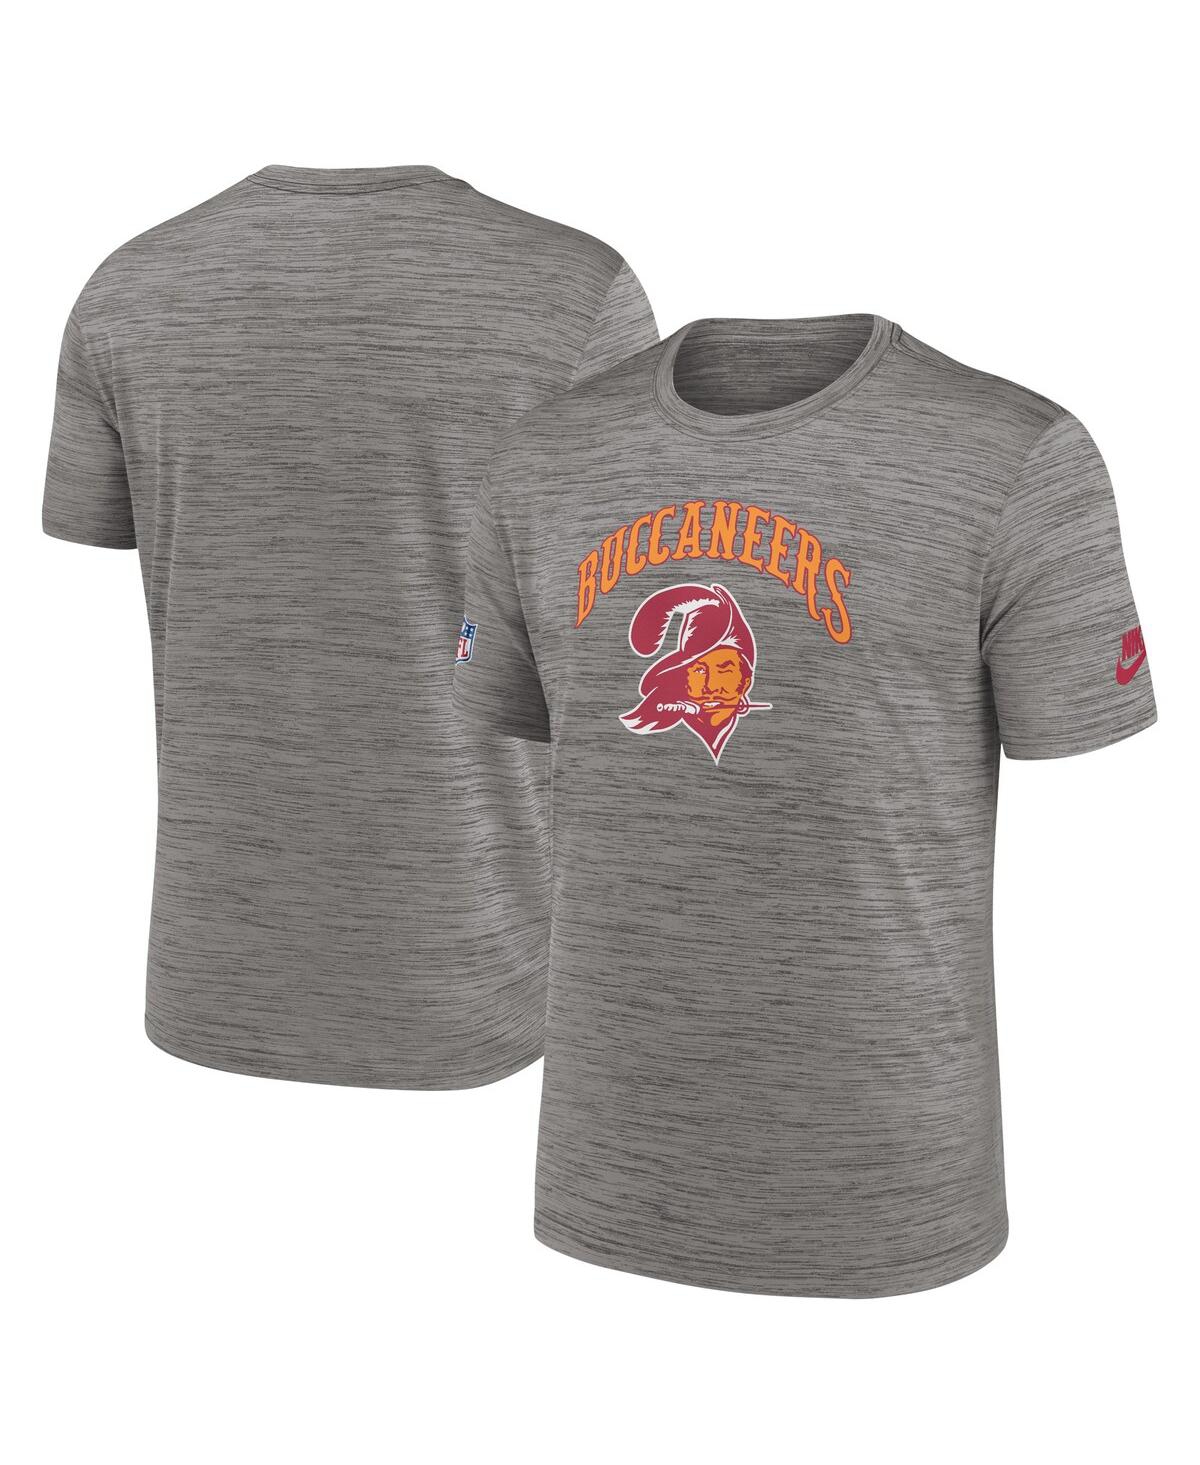 Shop Nike Men's  Heather Charcoal Tampa Bay Buccaneers Throwback Sideline Performance T-shirt